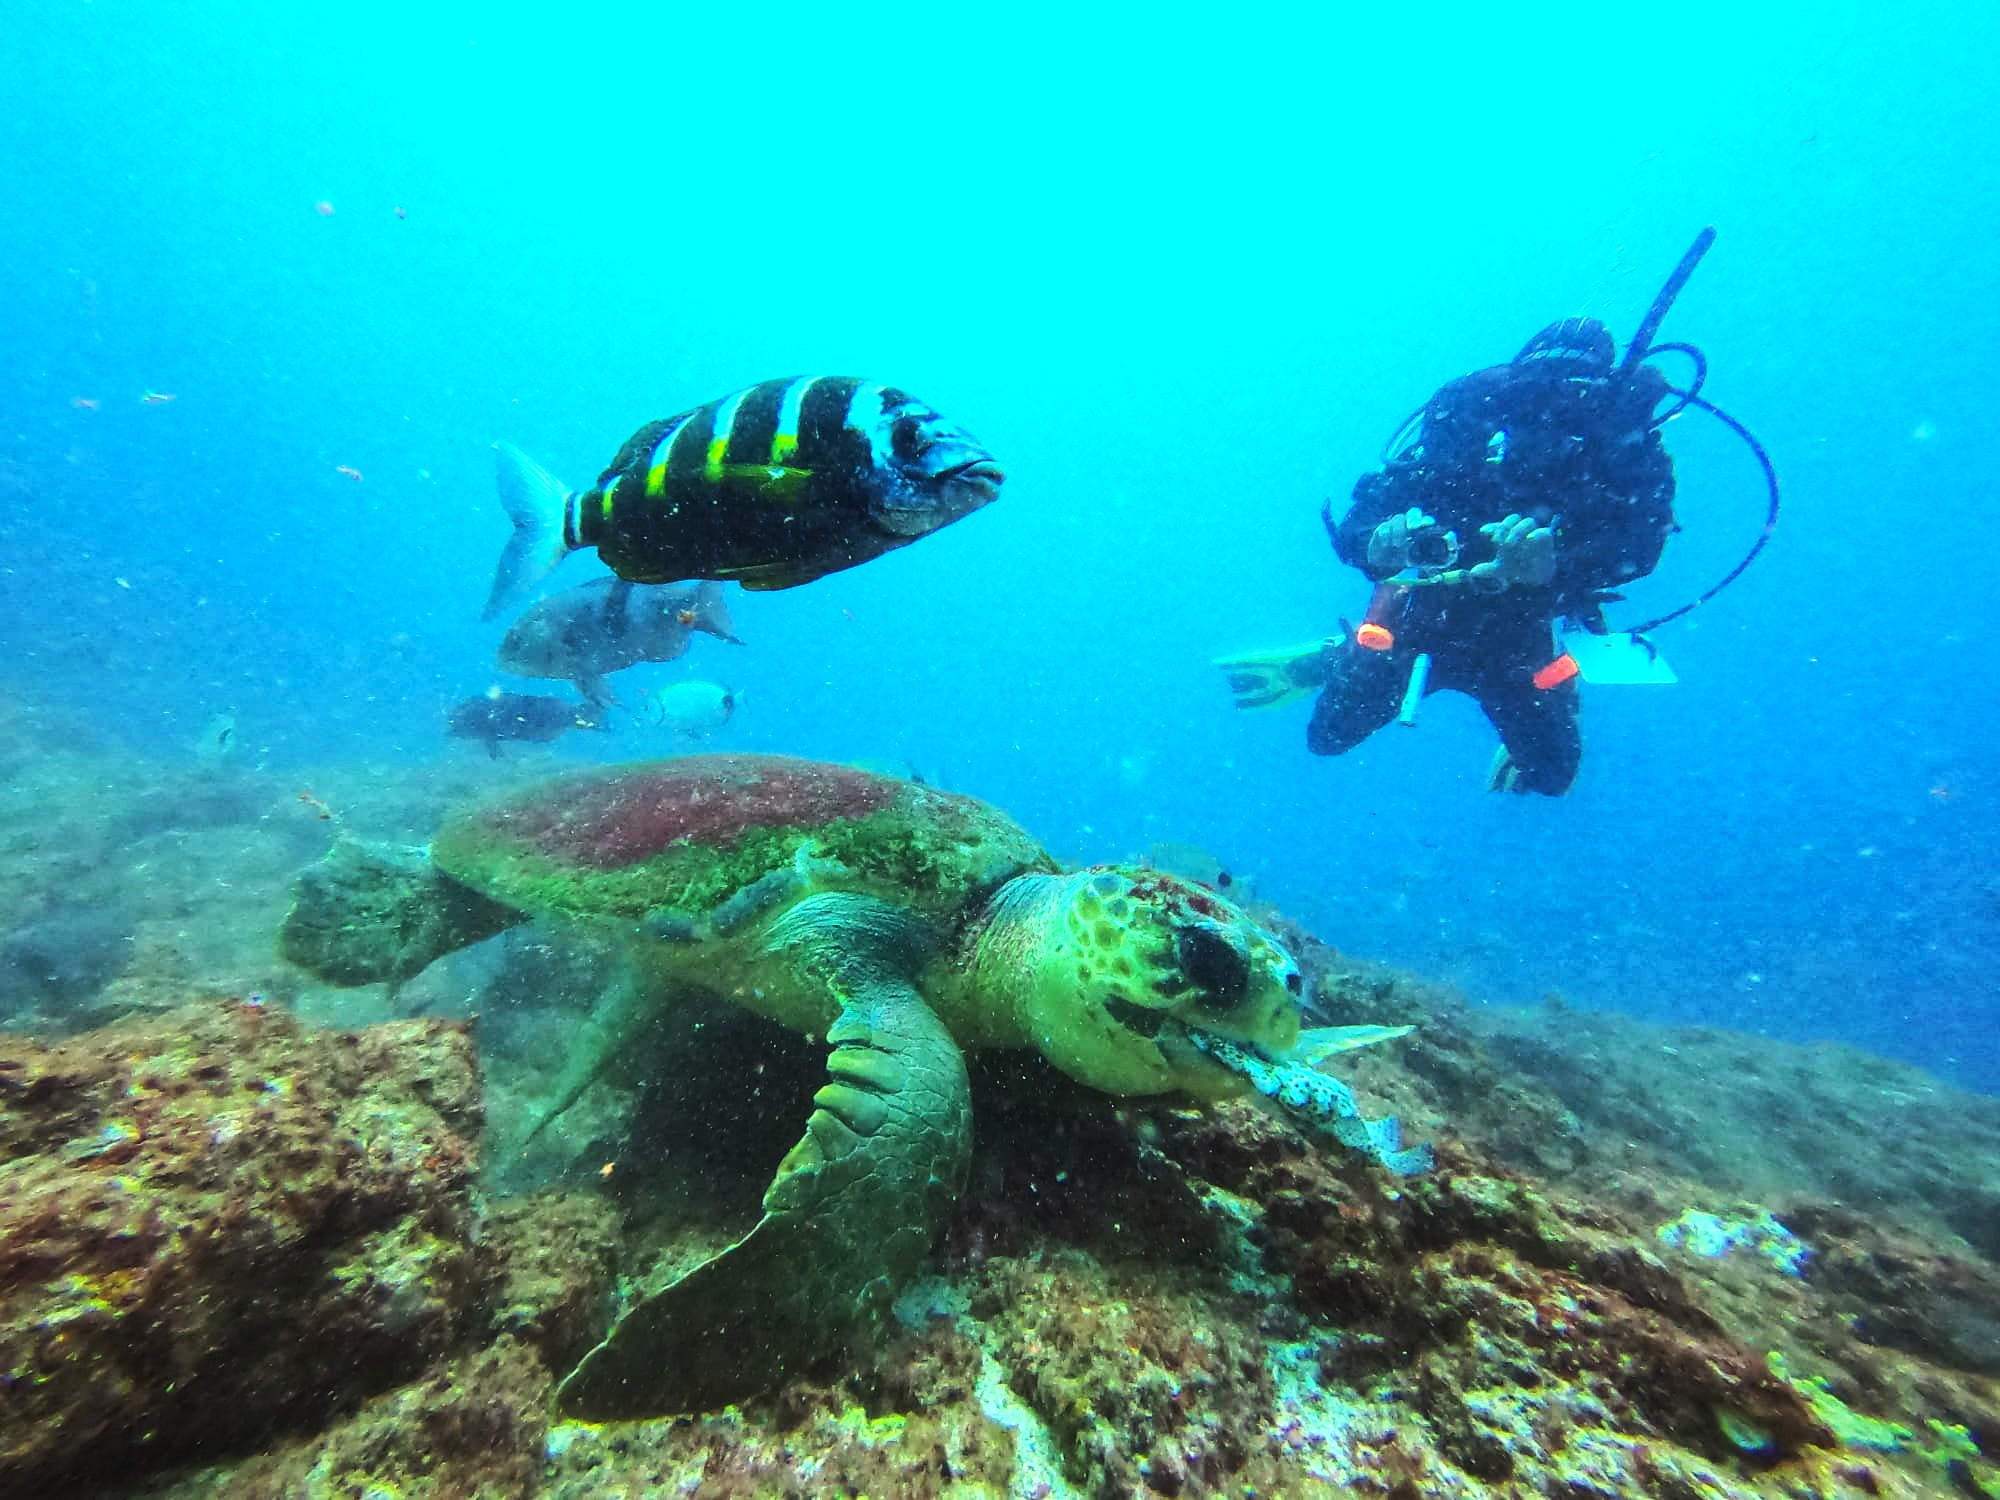 Turle and diver